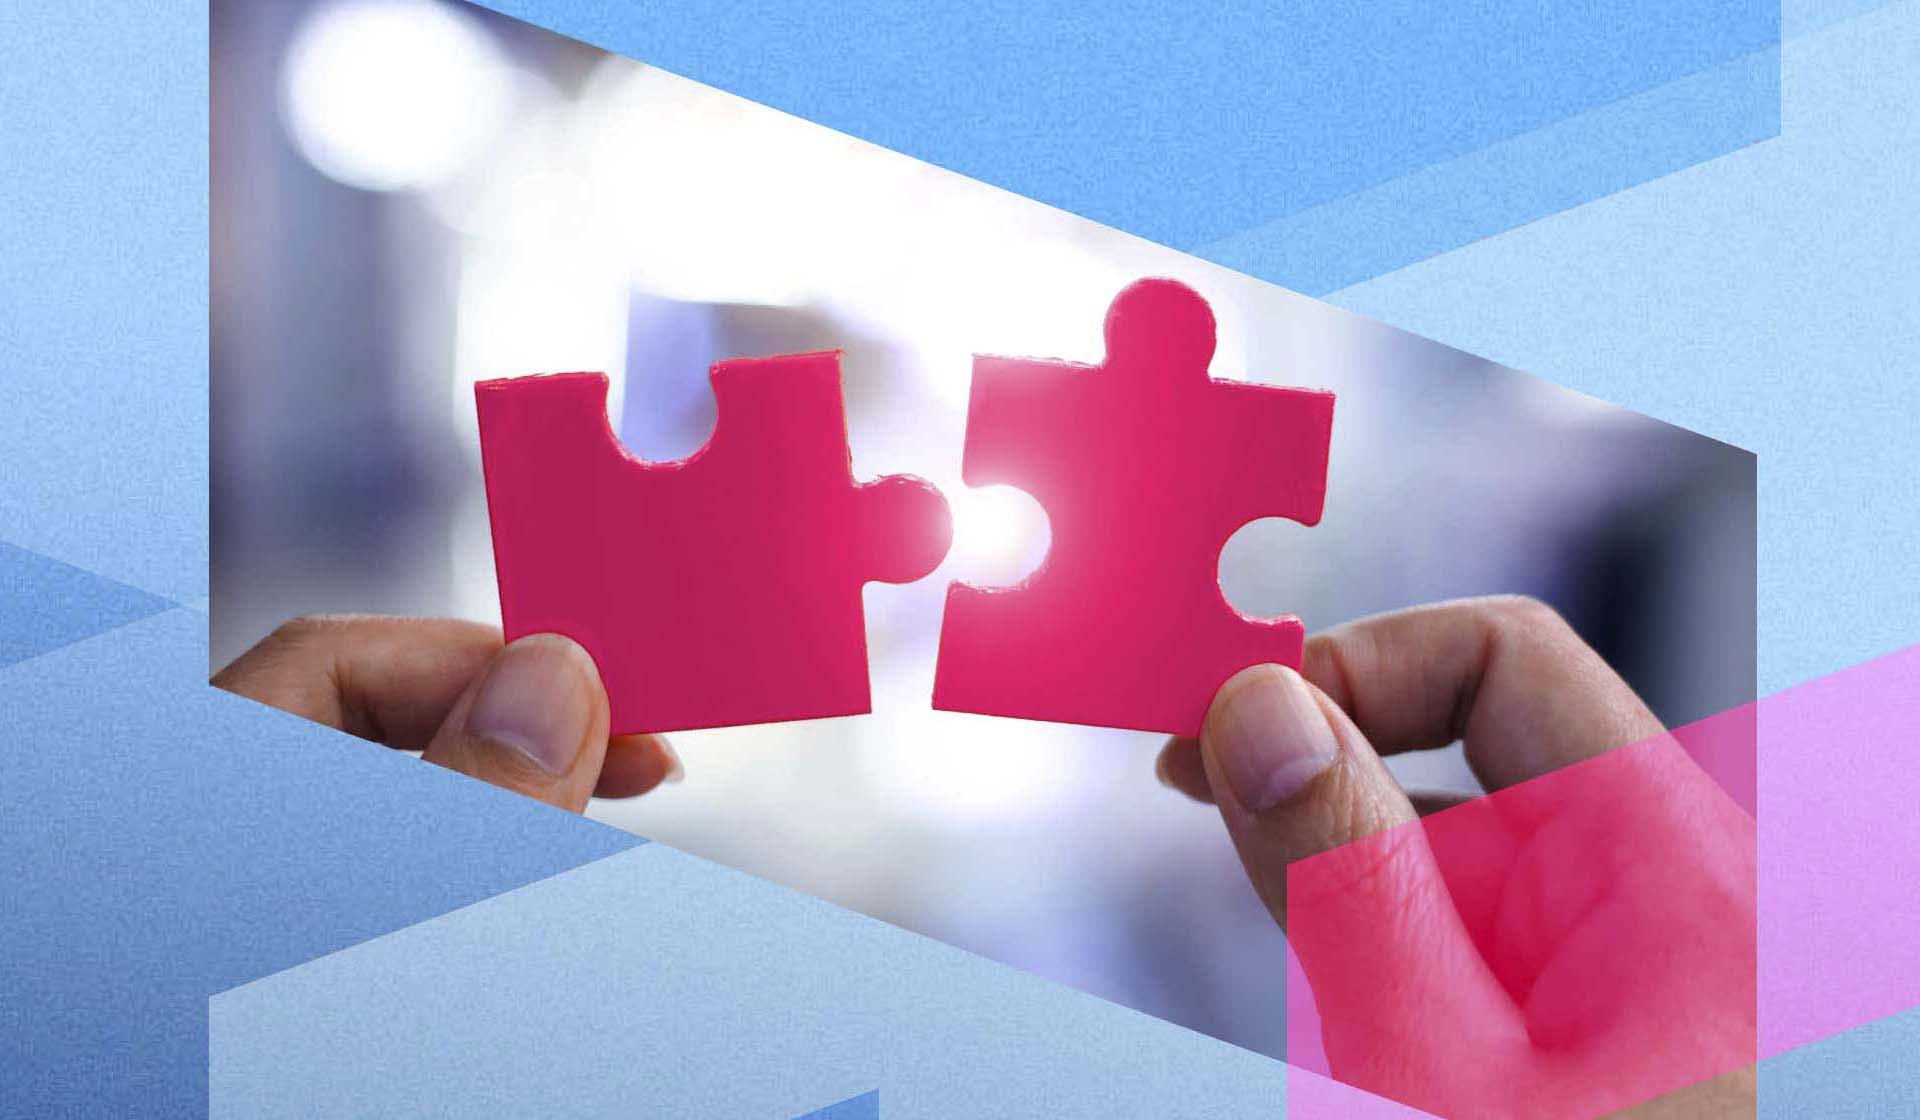 A pair of hands holding two pink puzzle pieces